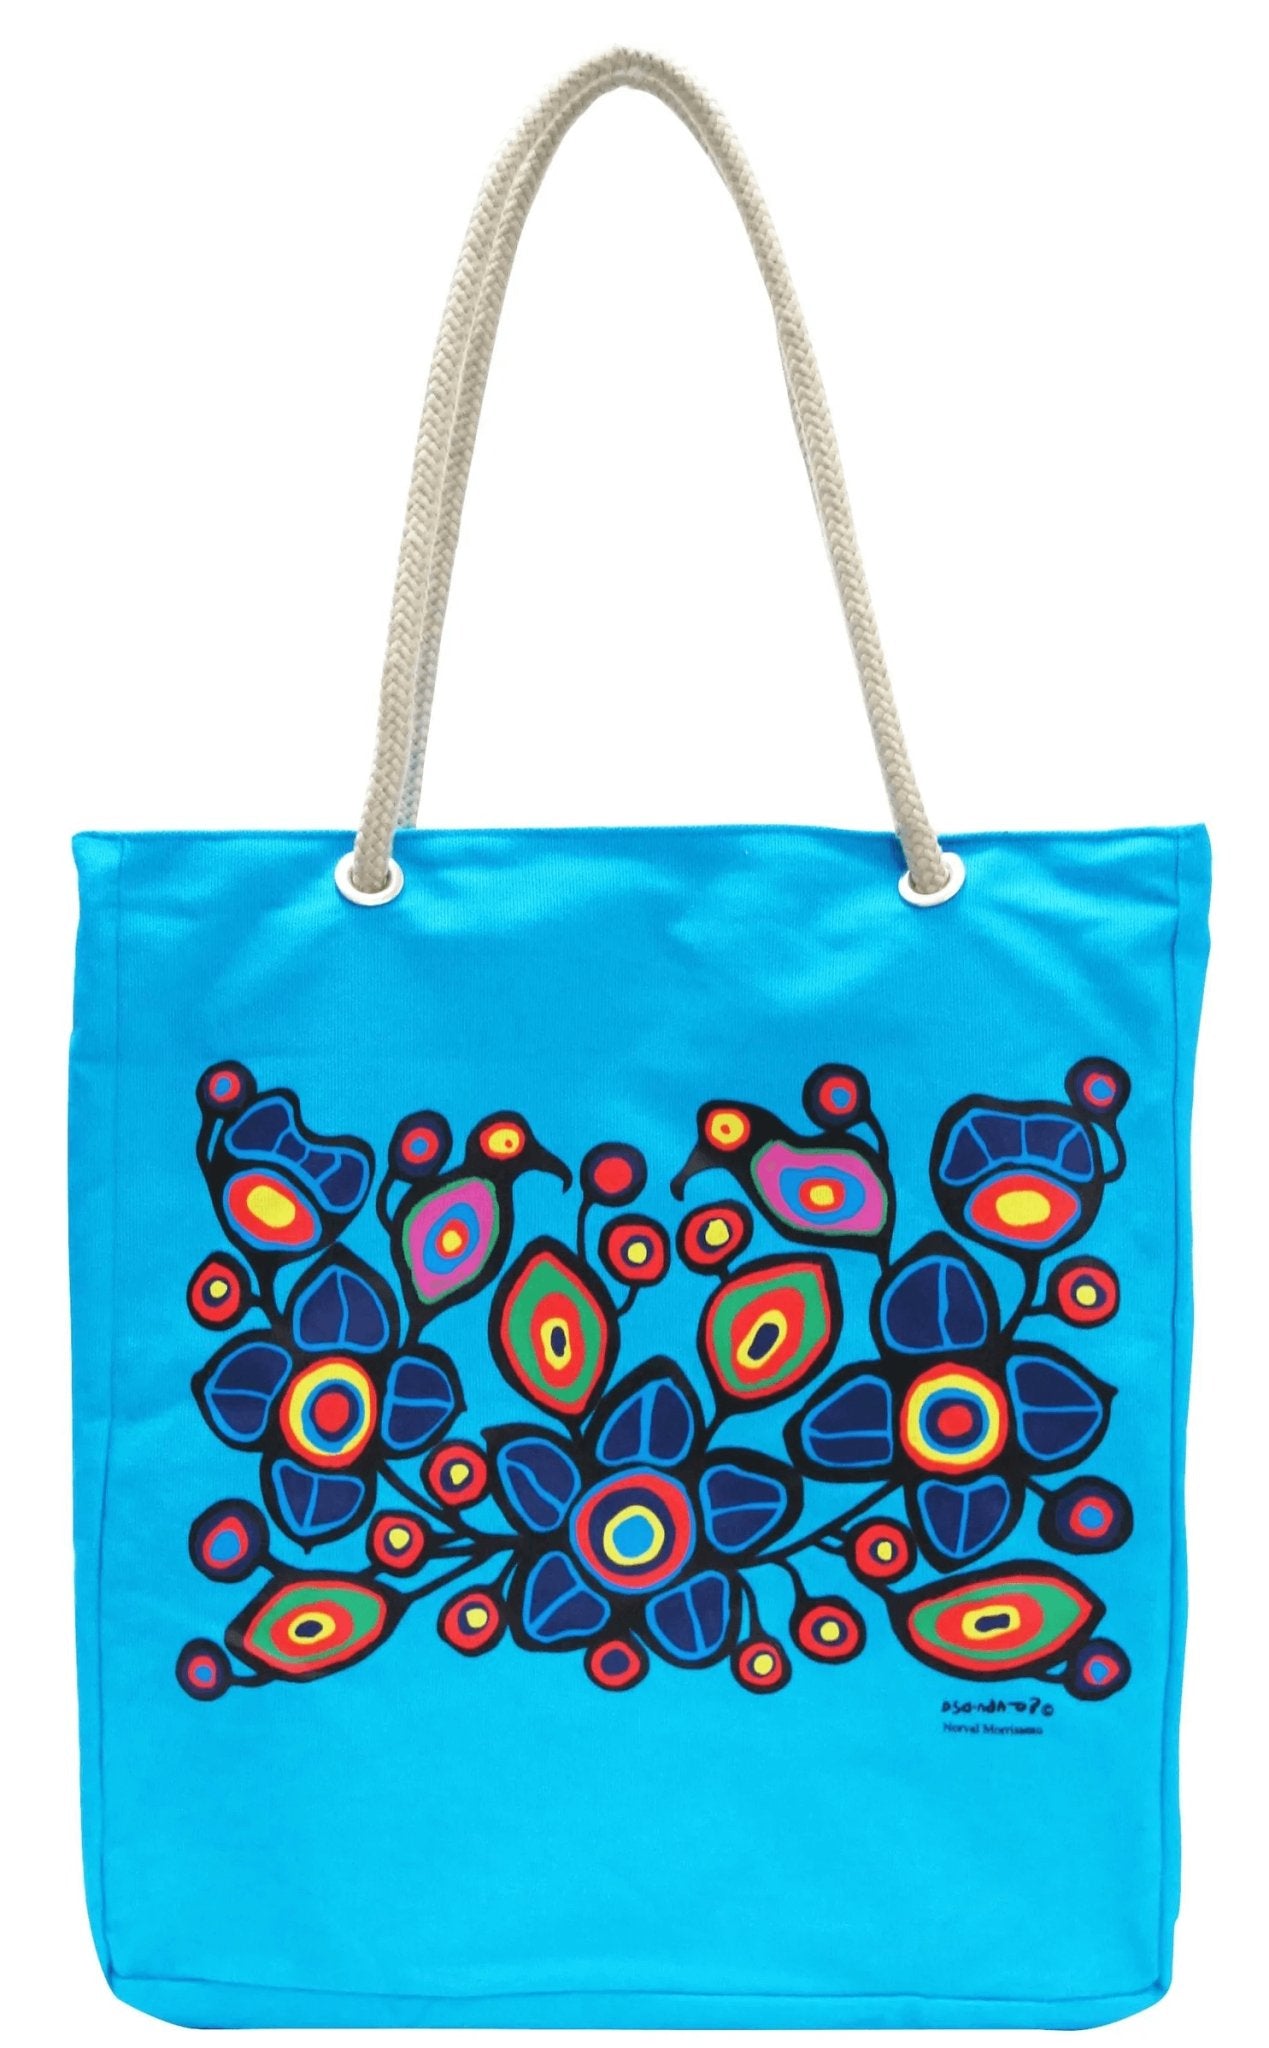 Norval Morrisseau Flowers and Birds Eco-Bag - Chic Meadow Boutique